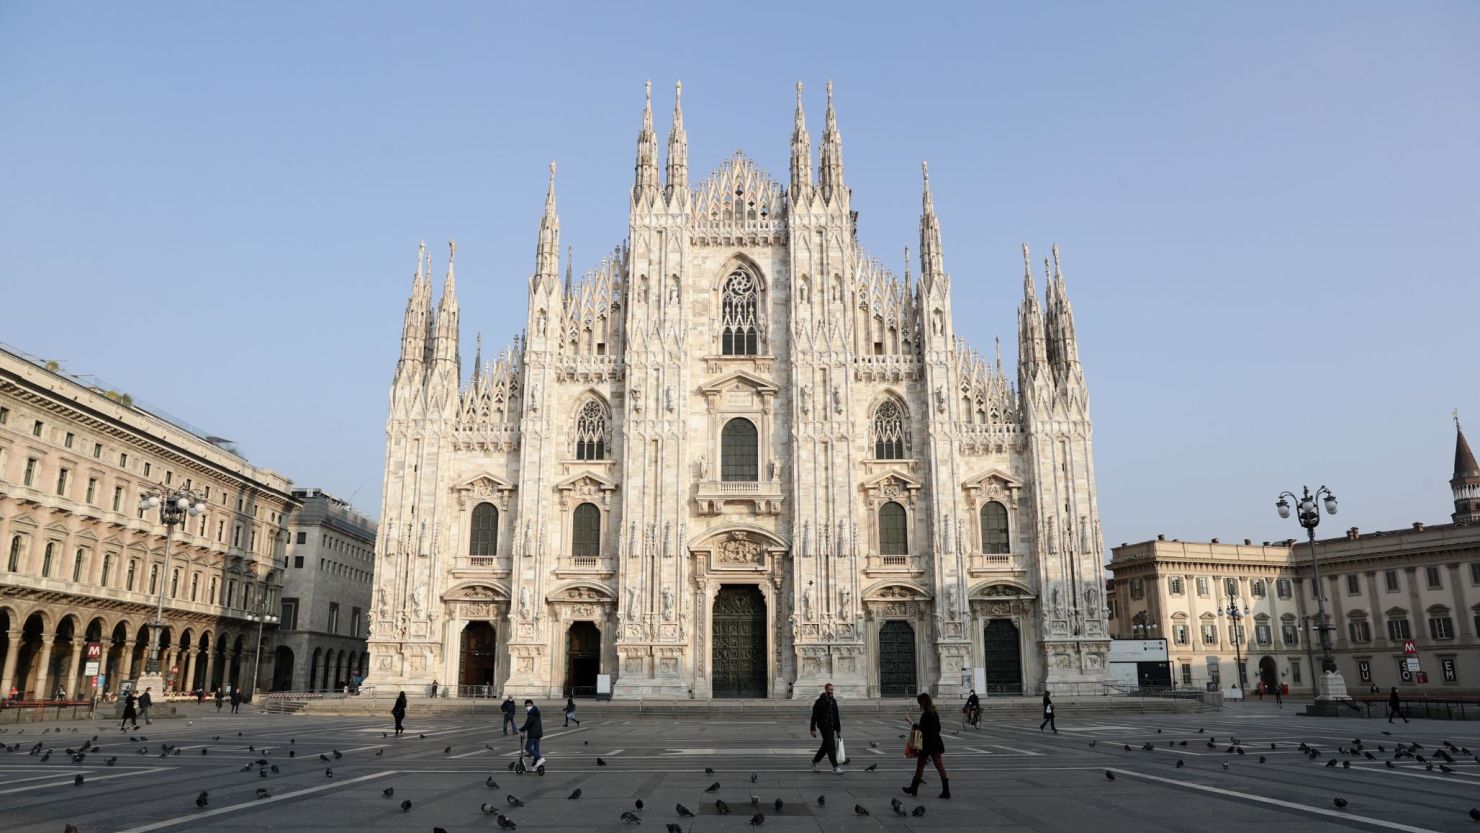 Milan went into a soft lockdown on November 6, with non-essential shops closed and people allowed to leave their homes only for work, health or emergency reasons.